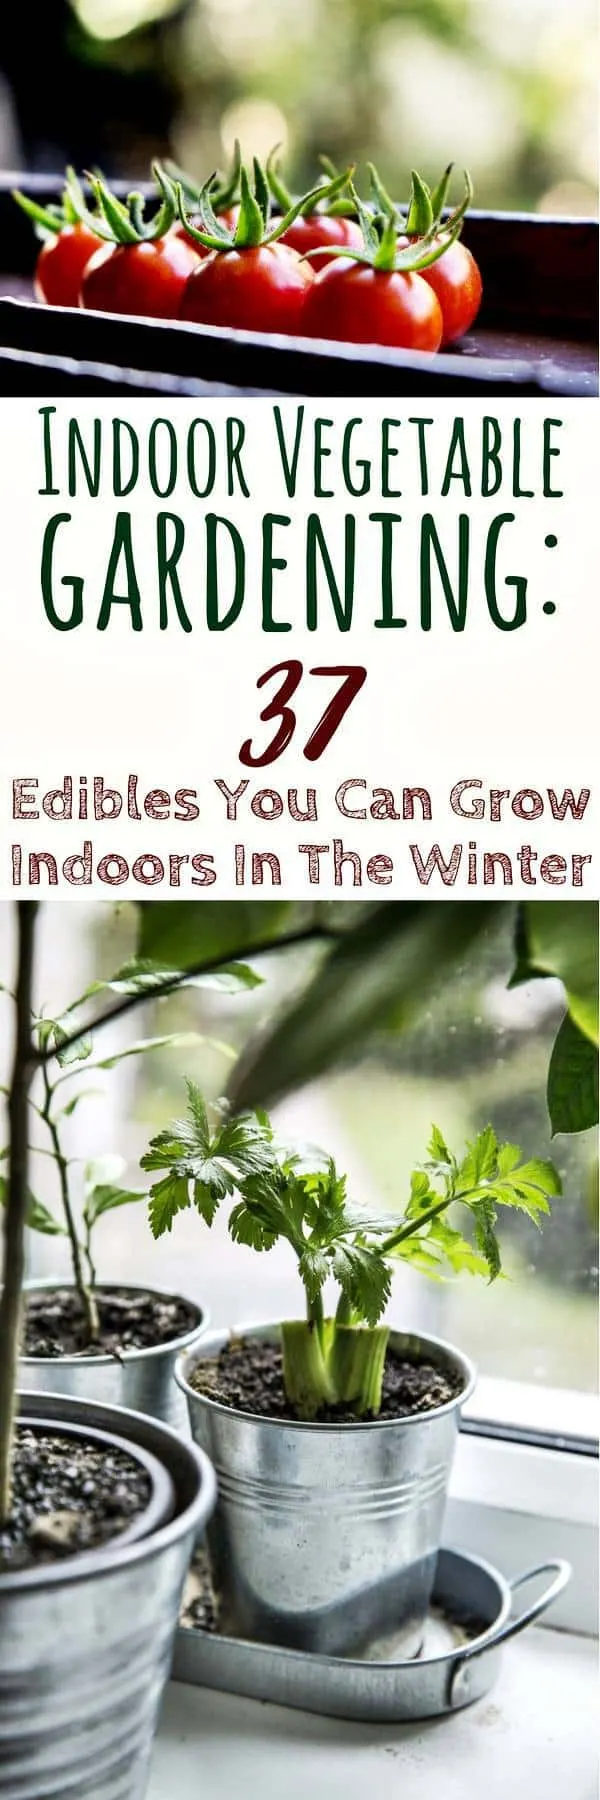 Indoor Vegetable Gardening: 37 Edibles You Can Grow Indoors In The Winter - As a prepper, one of the essential skills is for you to be able to sustain yourself and have food available to you the whole year, if and when you need it. One way of achieving this, is through an indoor vegetable garden. It doesn’t take up a lot of space and, more importantly, is able to function entirely inside.